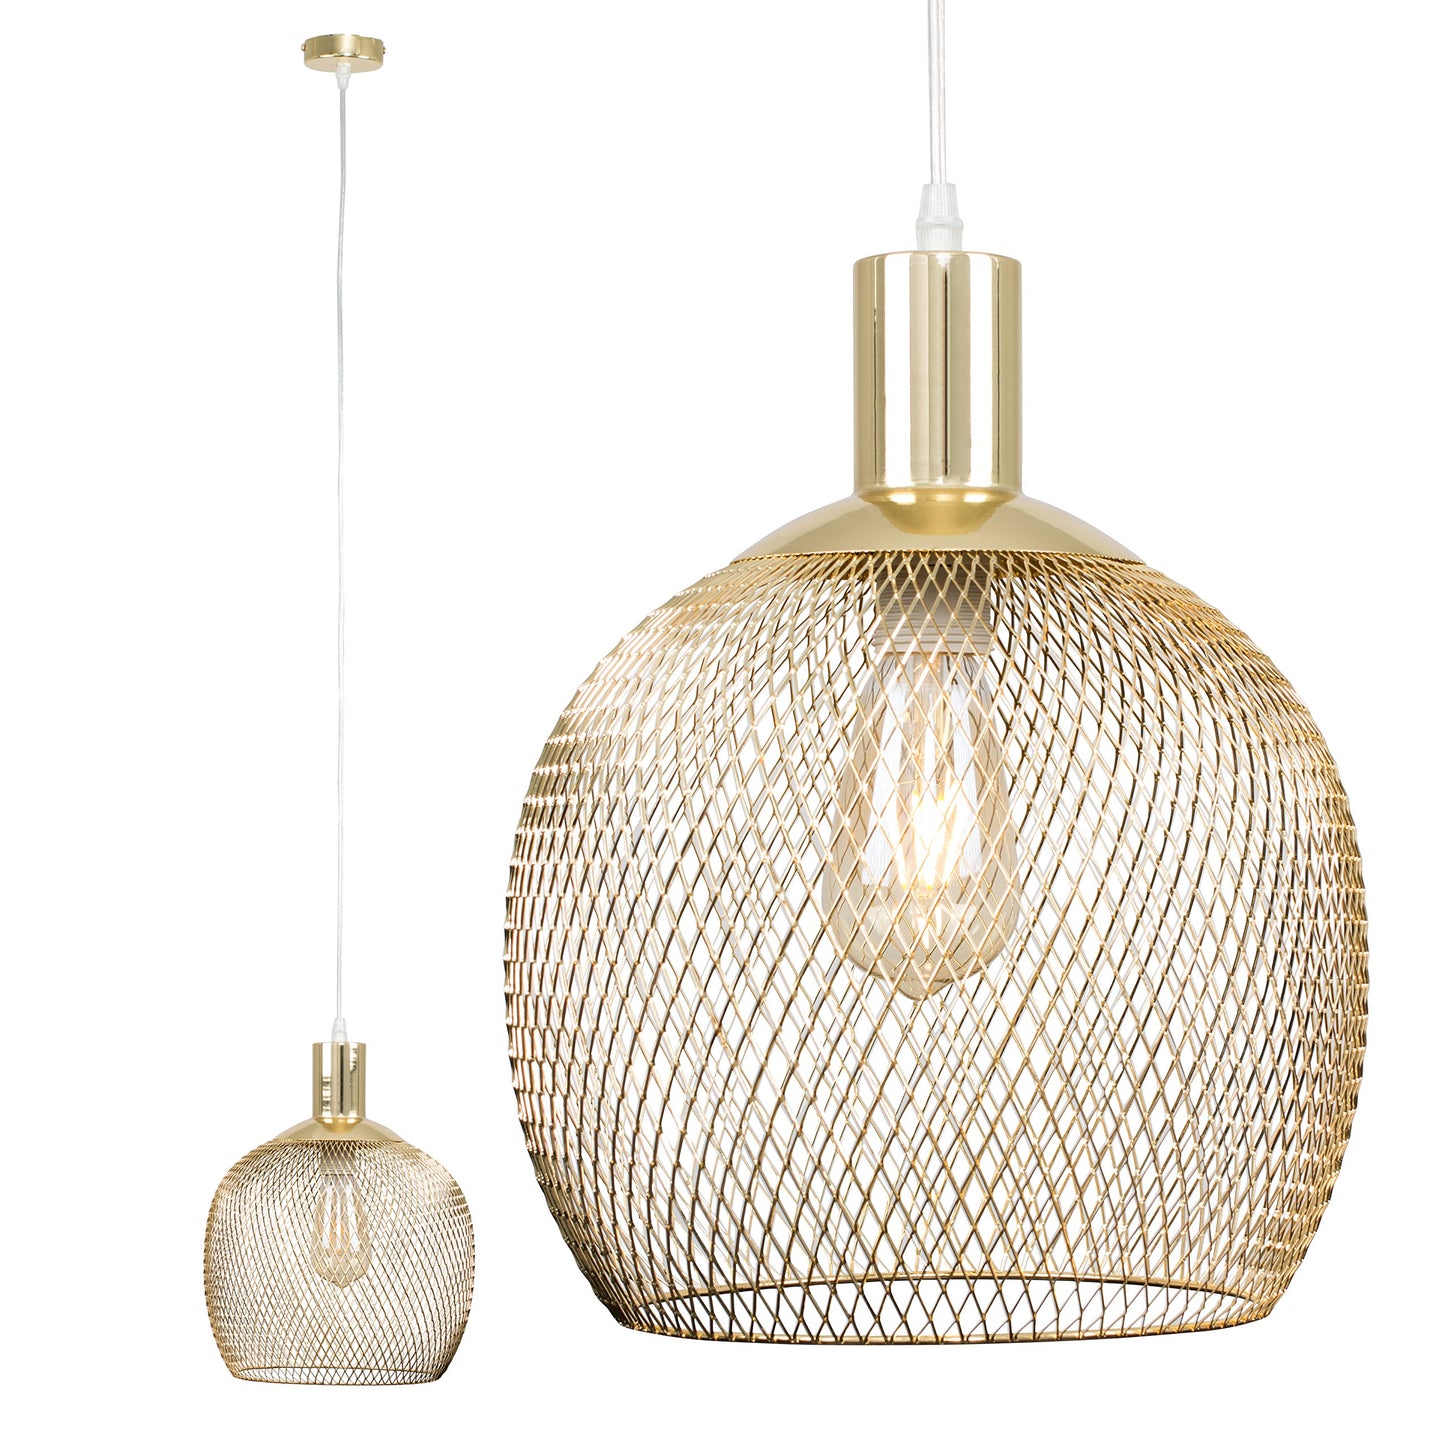 MiniSun Retro Style Gold Metal Mesh Basket Style Ceiling Pendant Light Fitting - Complete with a 4w LED Filament Bulb [2700K Warm White]